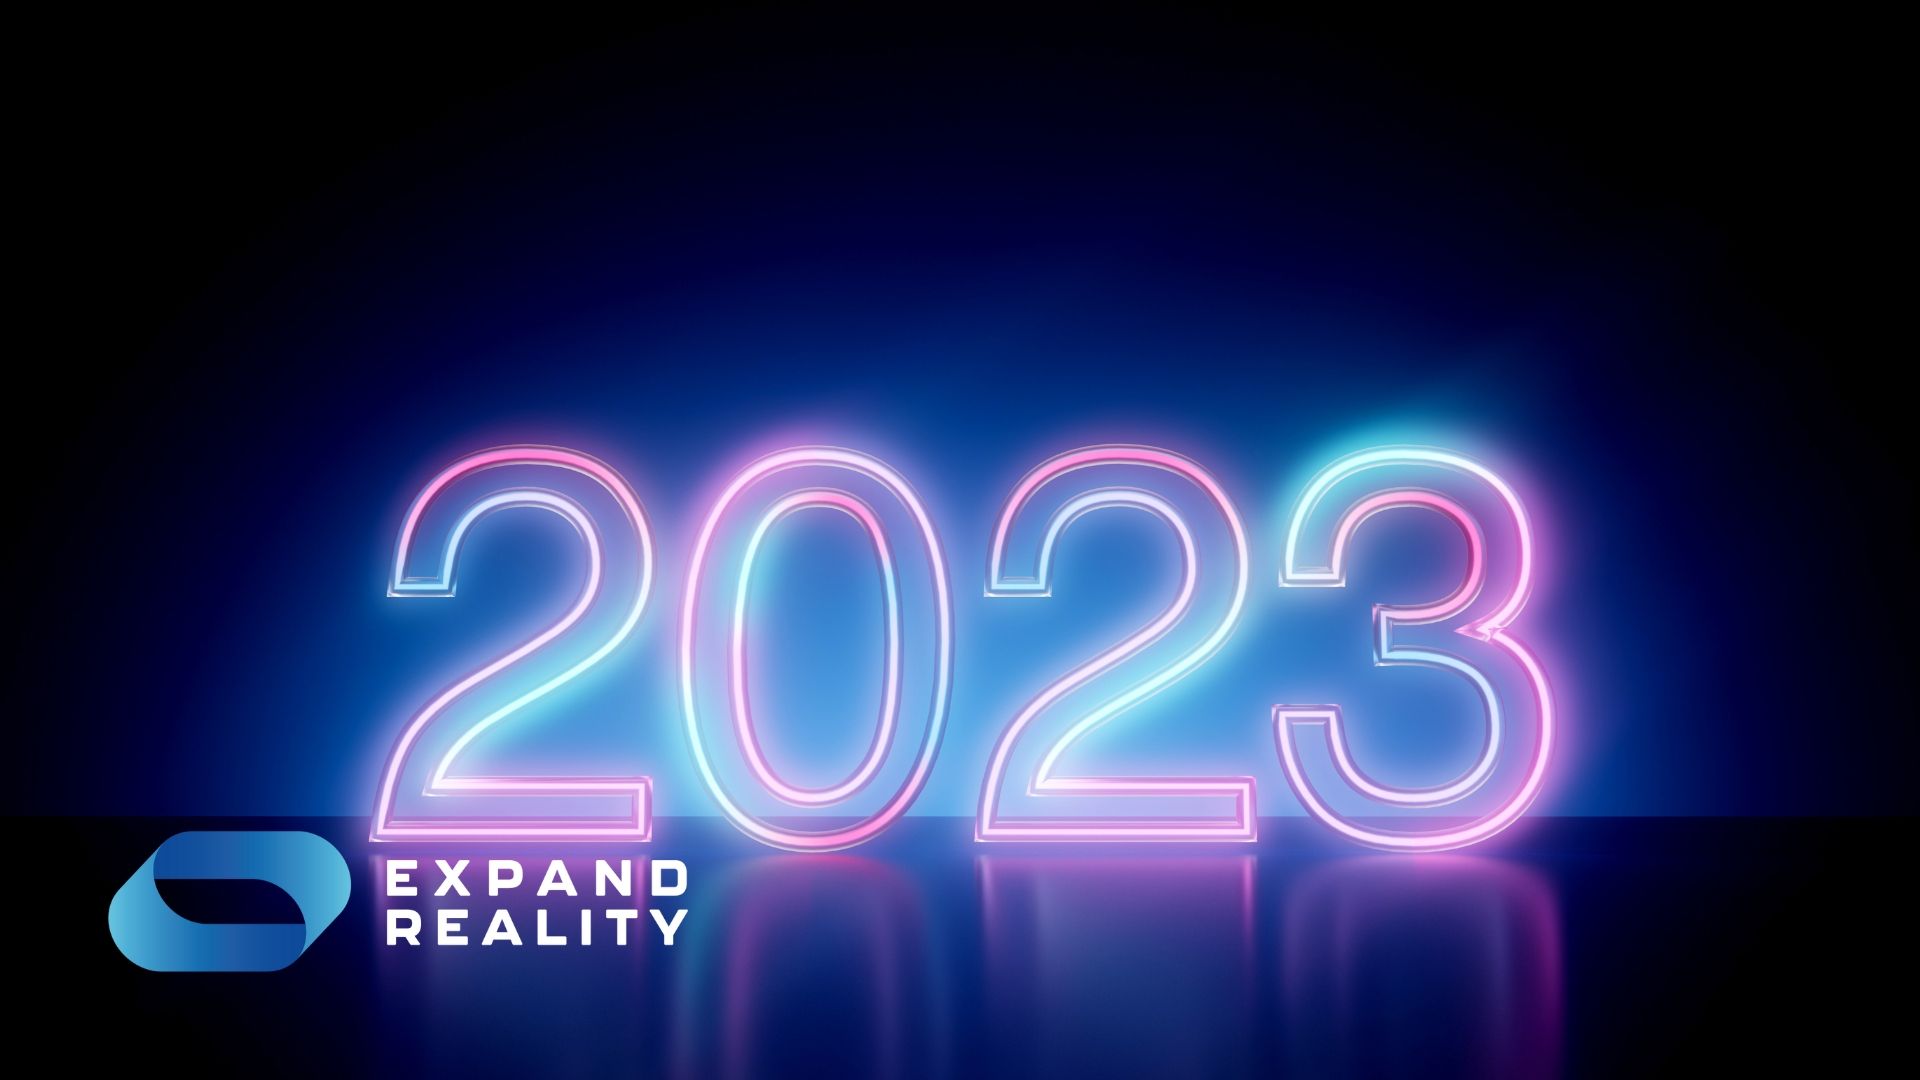 XR adoption is on the rise. Discover the latest statistics and trends for augmented, virtual and mixed reality, along with predictions for the year ahead.